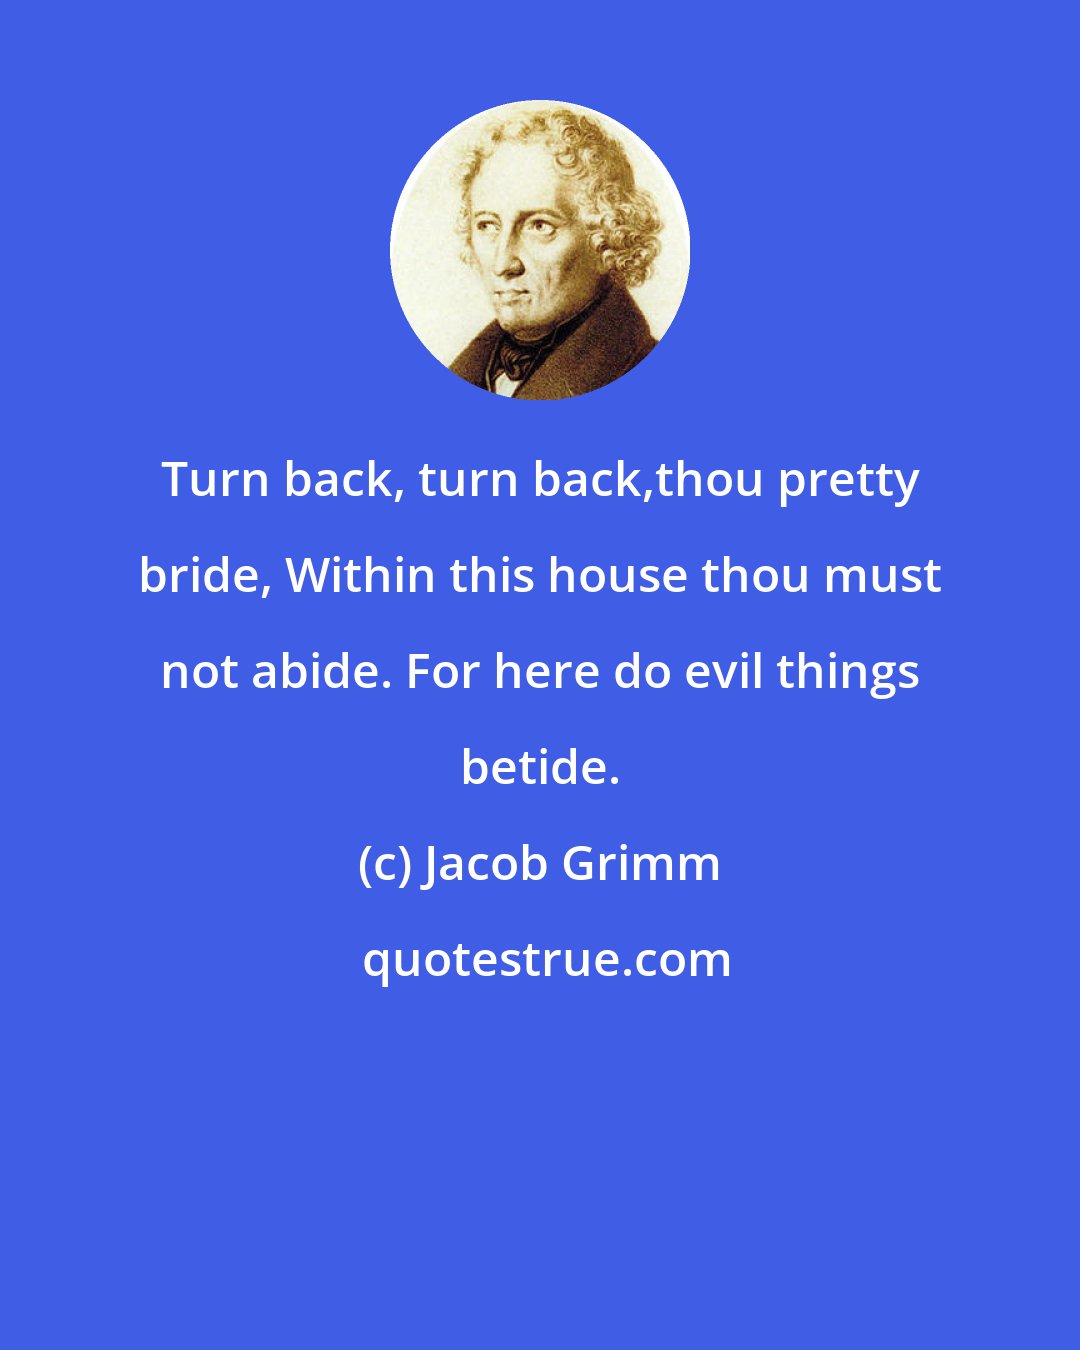 Jacob Grimm: Turn back, turn back,thou pretty bride, Within this house thou must not abide. For here do evil things betide.